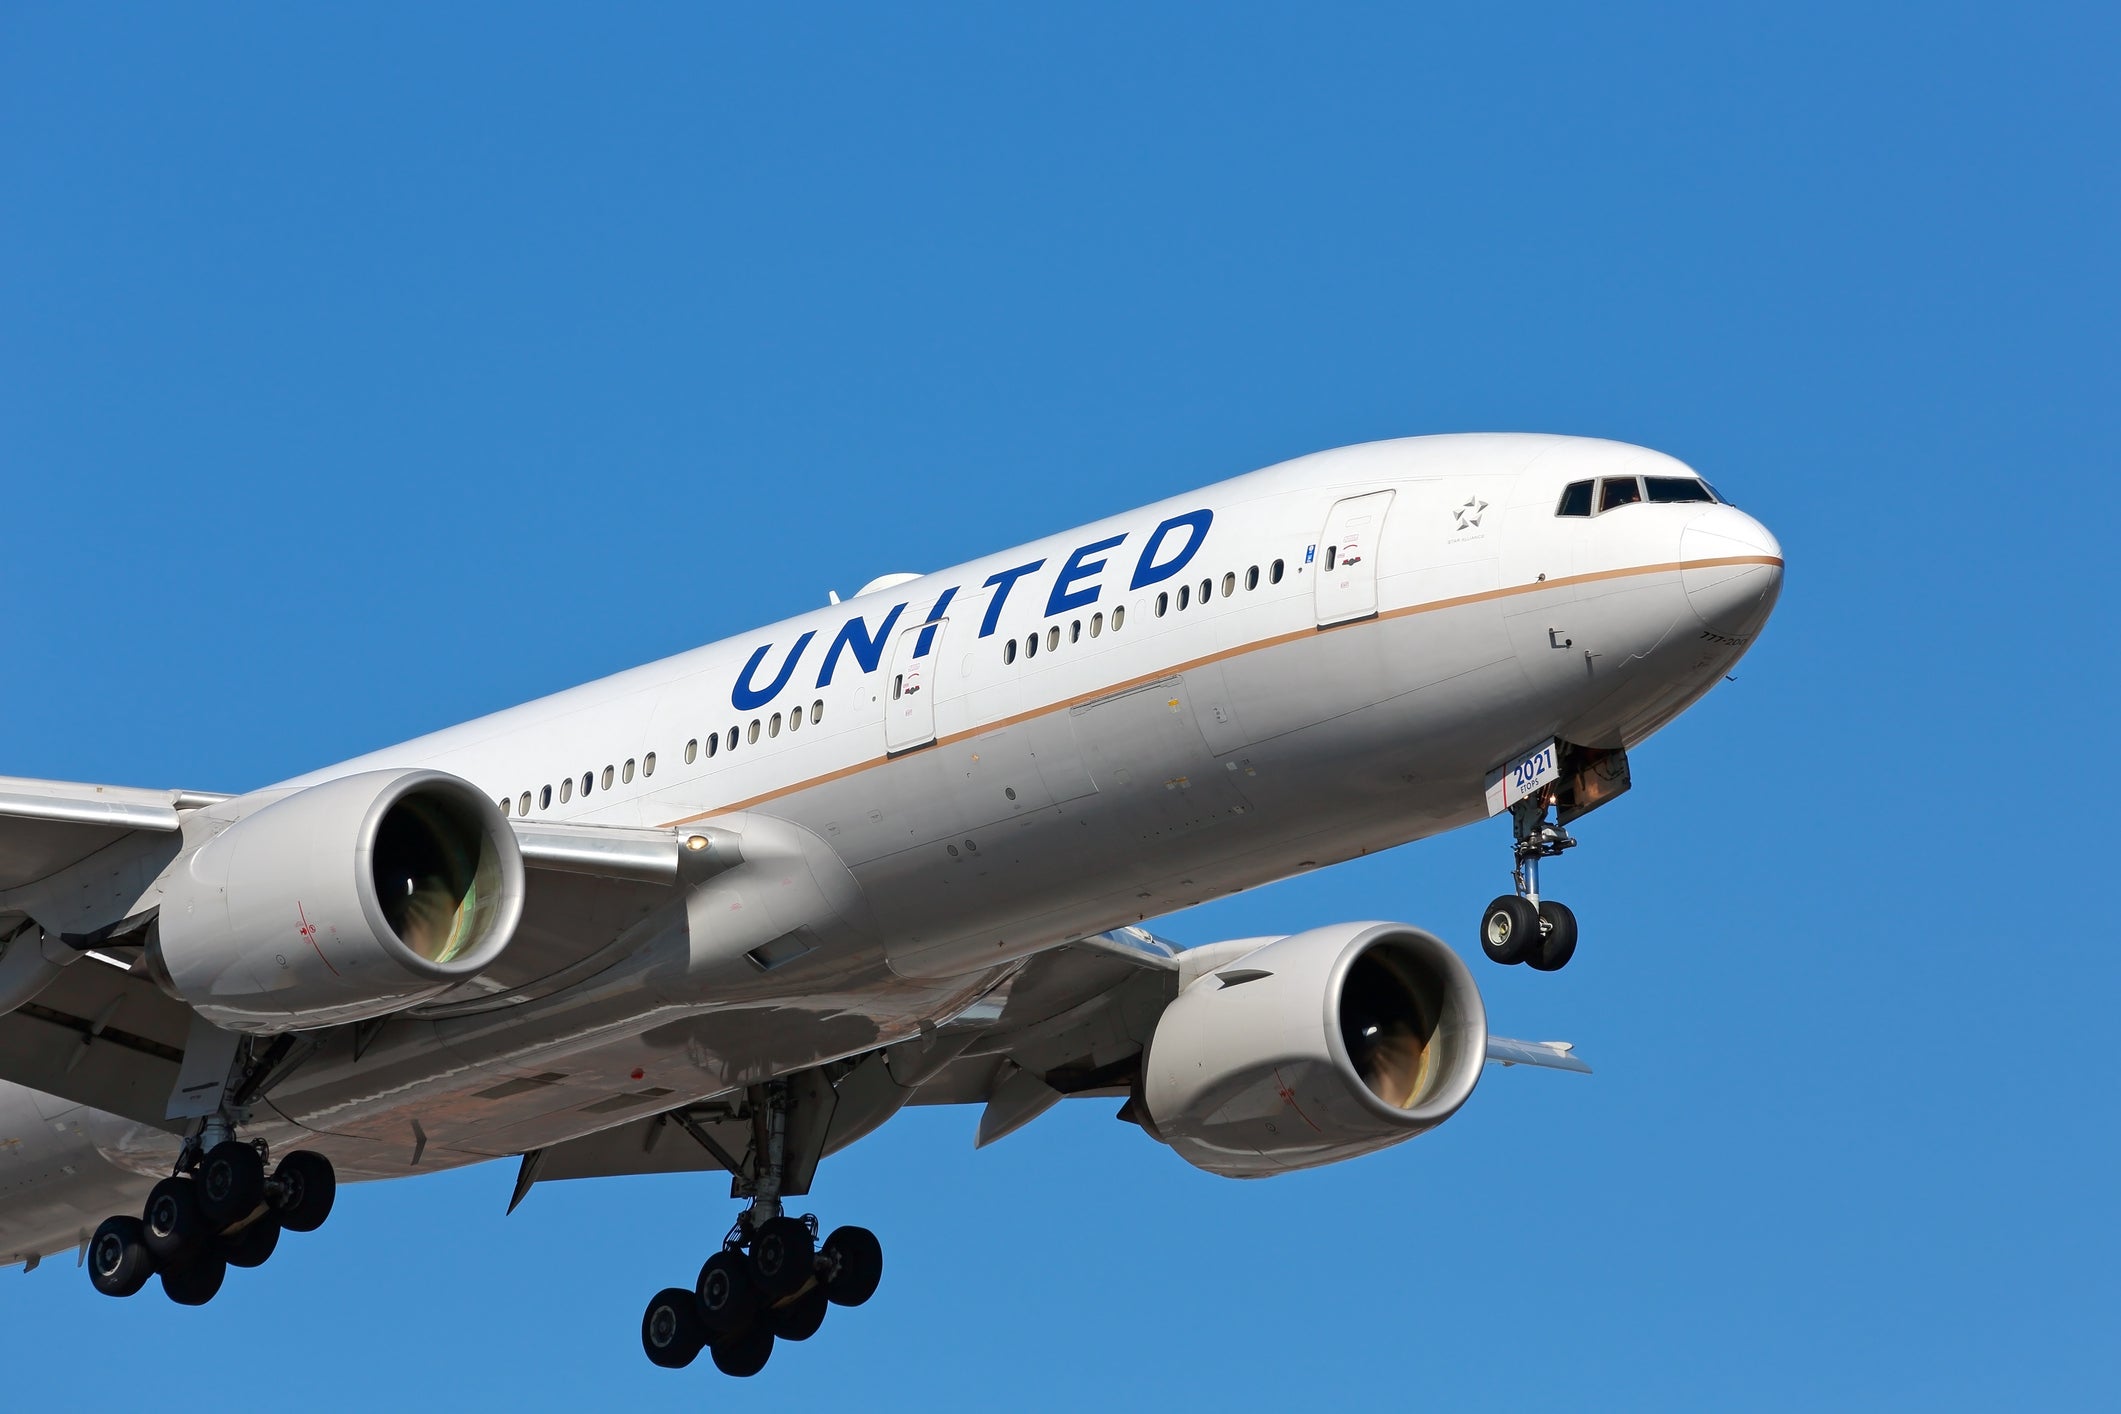 Incident occurred on a United flight